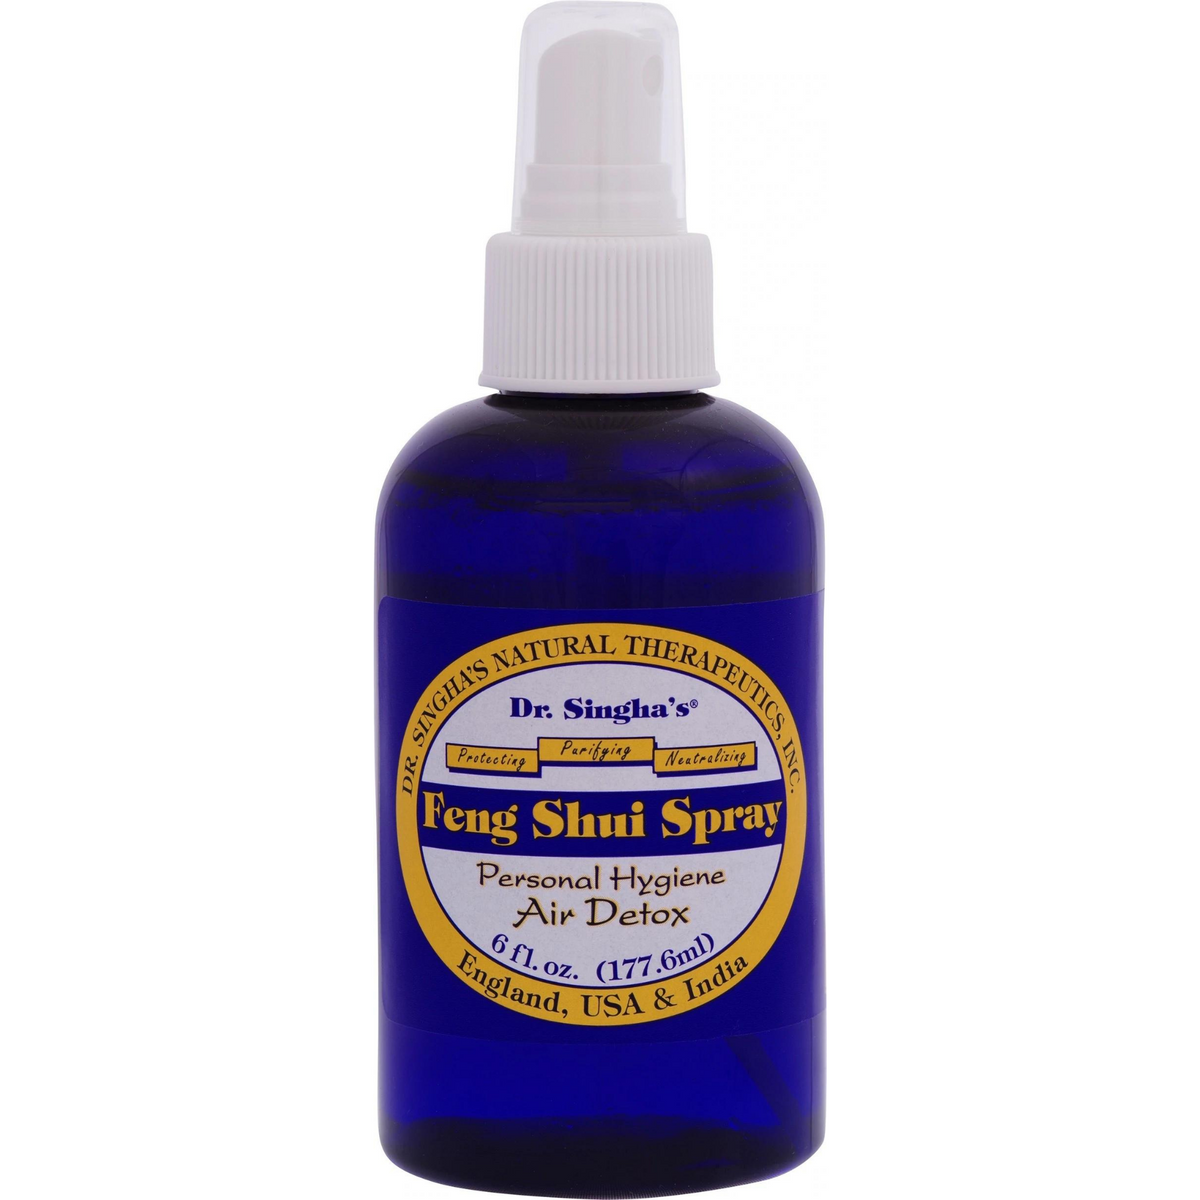 Primary image of Feng Shui Spray